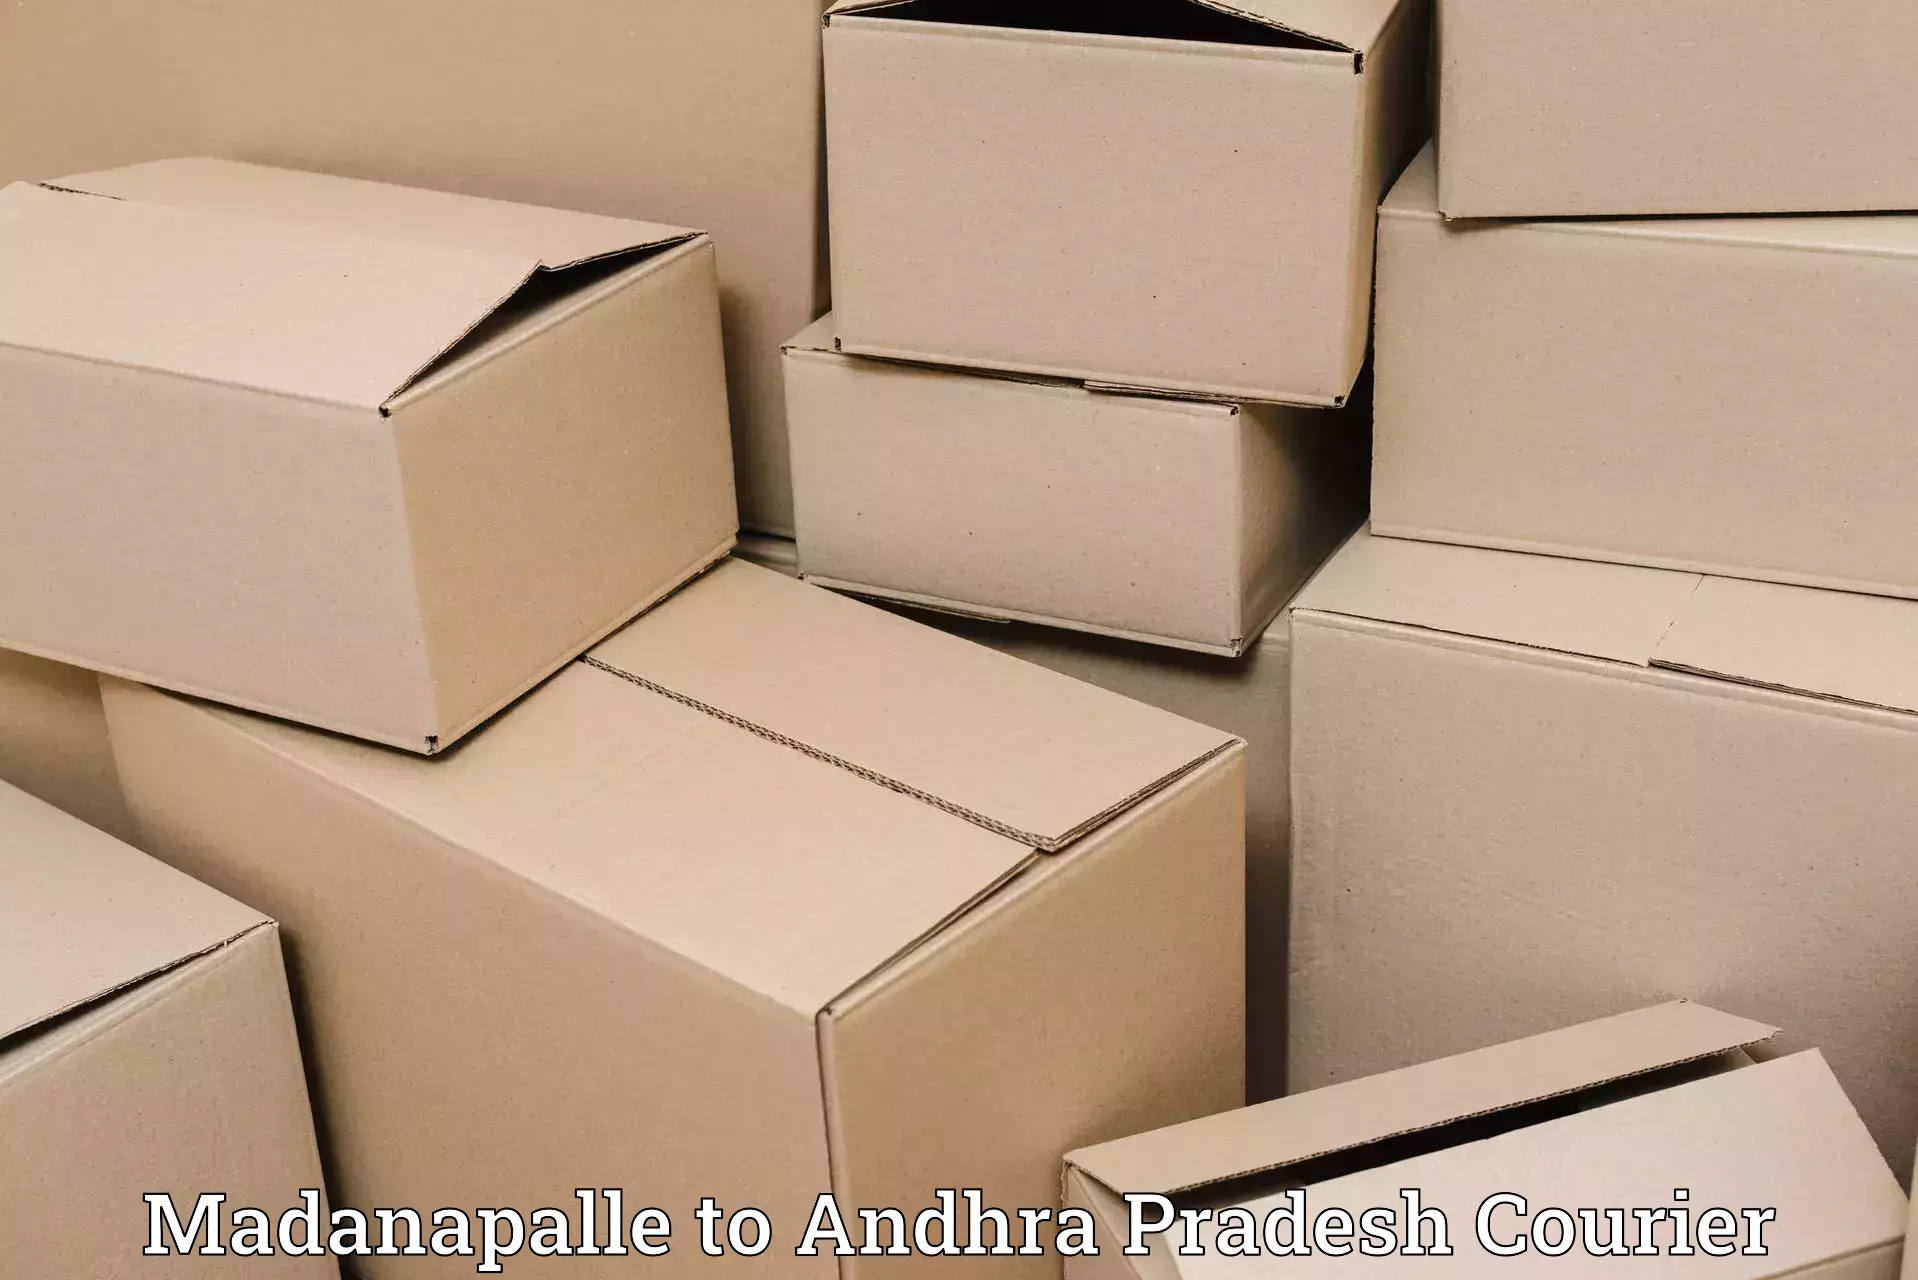 Bulk courier orders in Madanapalle to Visakhapatnam Port